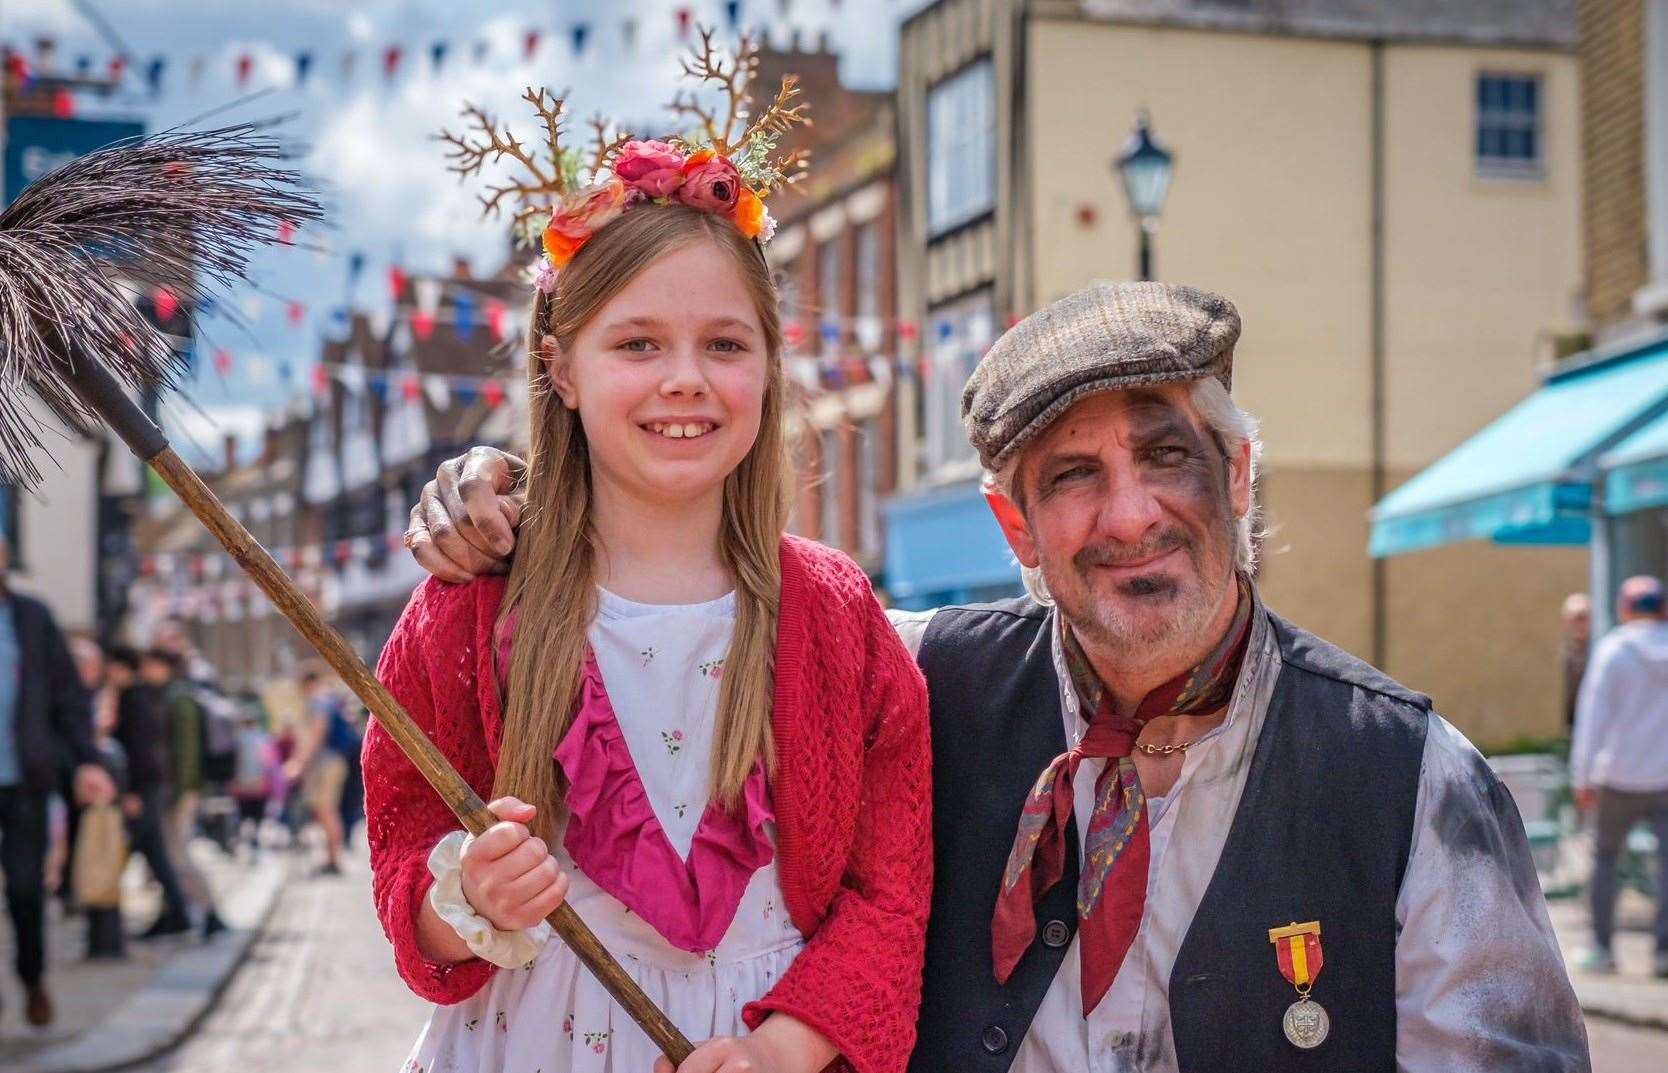 The festival is usually held on the first day of summer, a day historically celebrated by chimney sweeps. Picture: Steve Hartridge